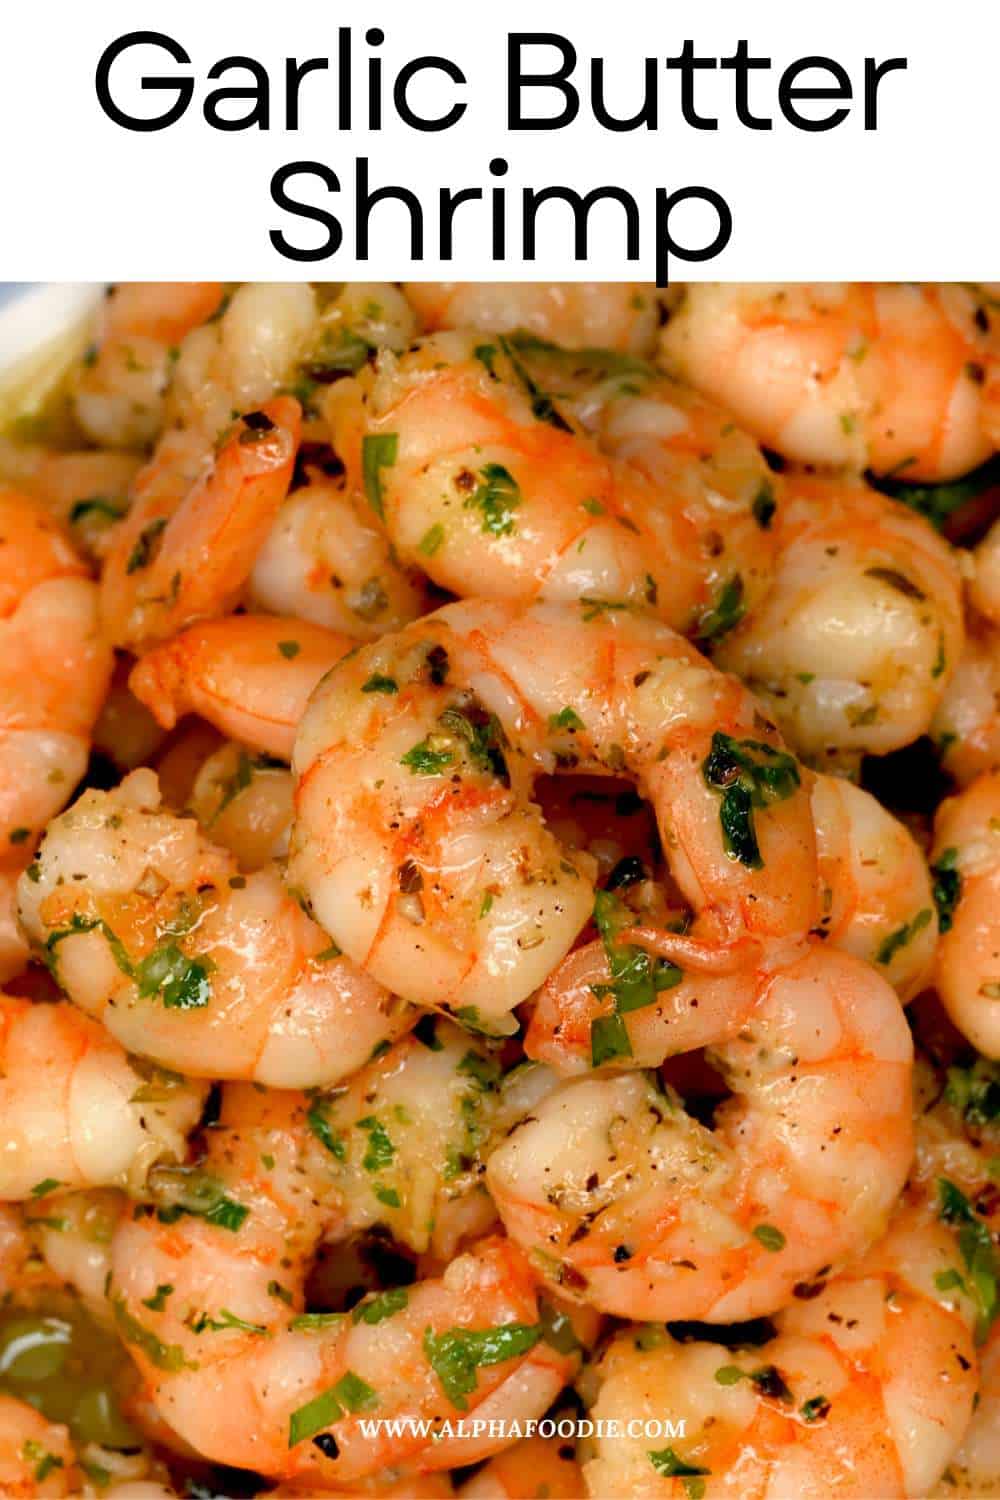 The Perfect Garlic Butter Shrimp - Alphafoodie